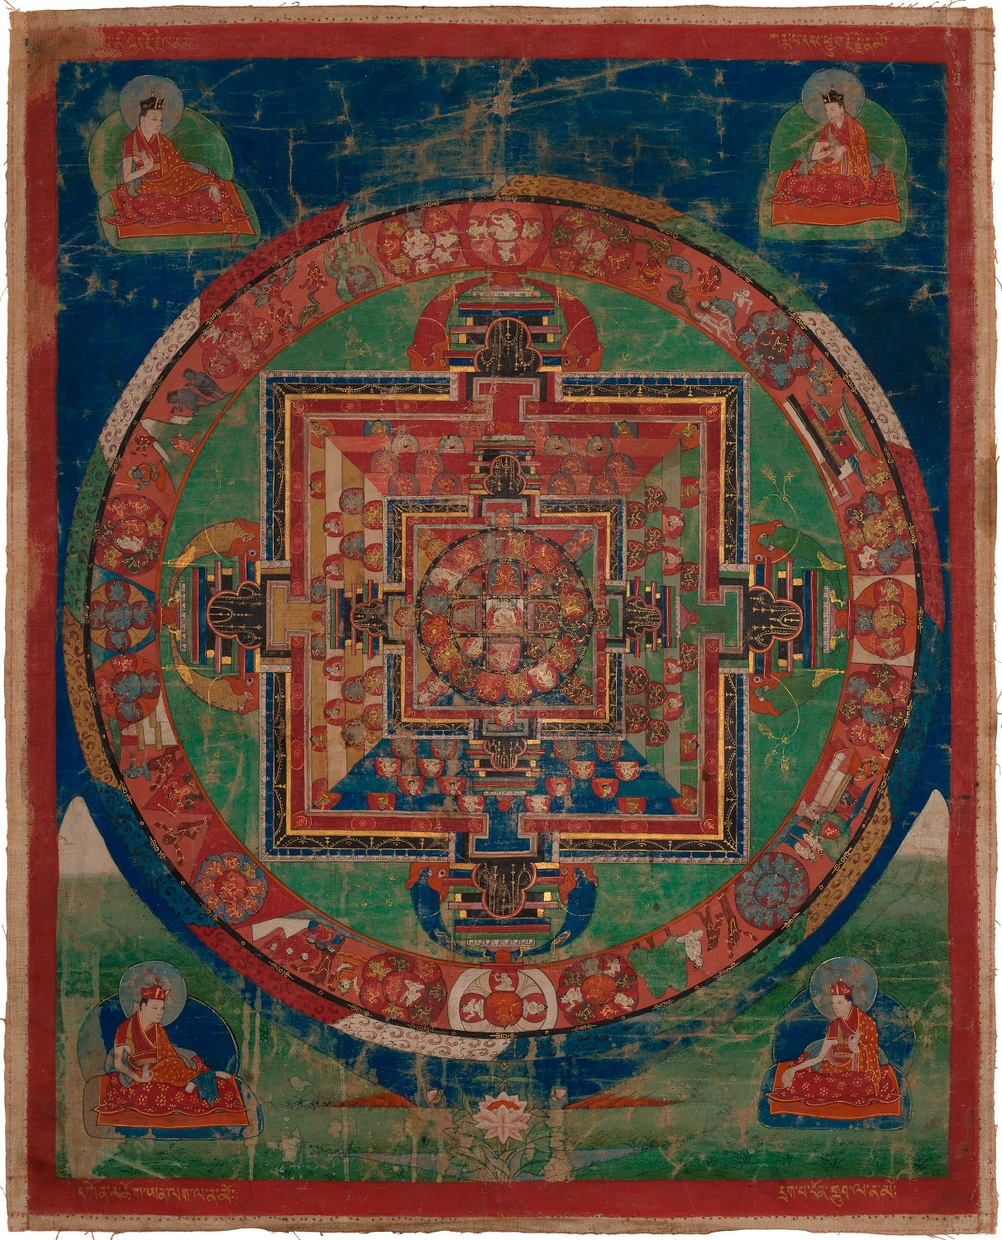 Unrecorded Tibetan artist, Mandala of the Luminous One, Nampar Nangdzé, 18th Century. Distemper on cloth. Frances Young Tang Teaching Museum at Skidmore College, Jack Shear Collection   